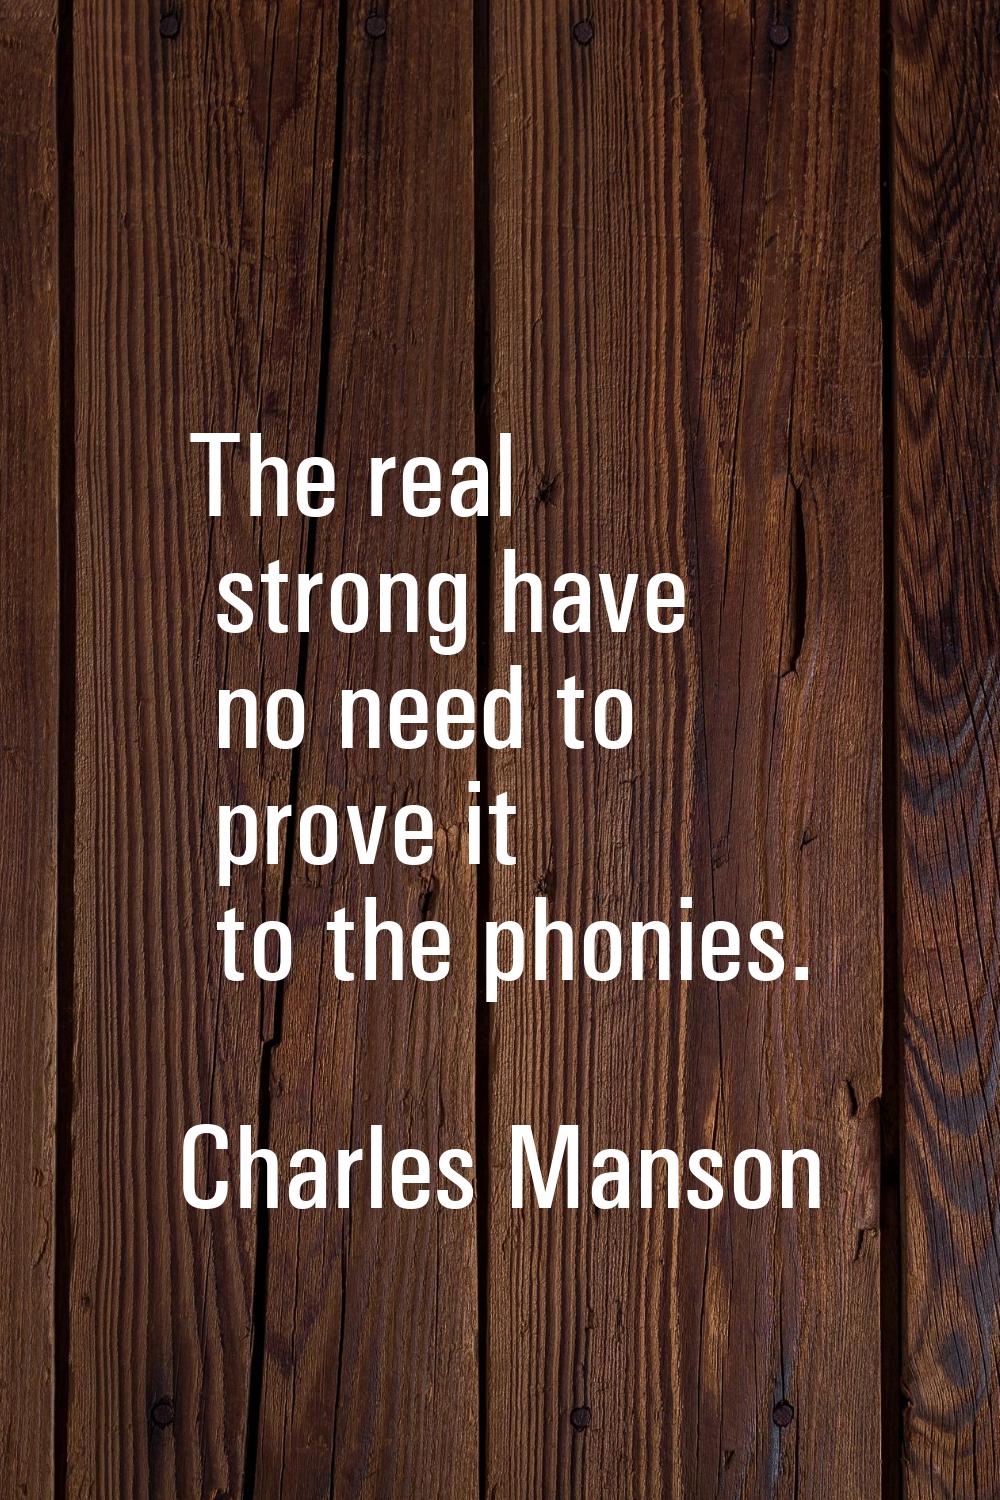 The real strong have no need to prove it to the phonies.